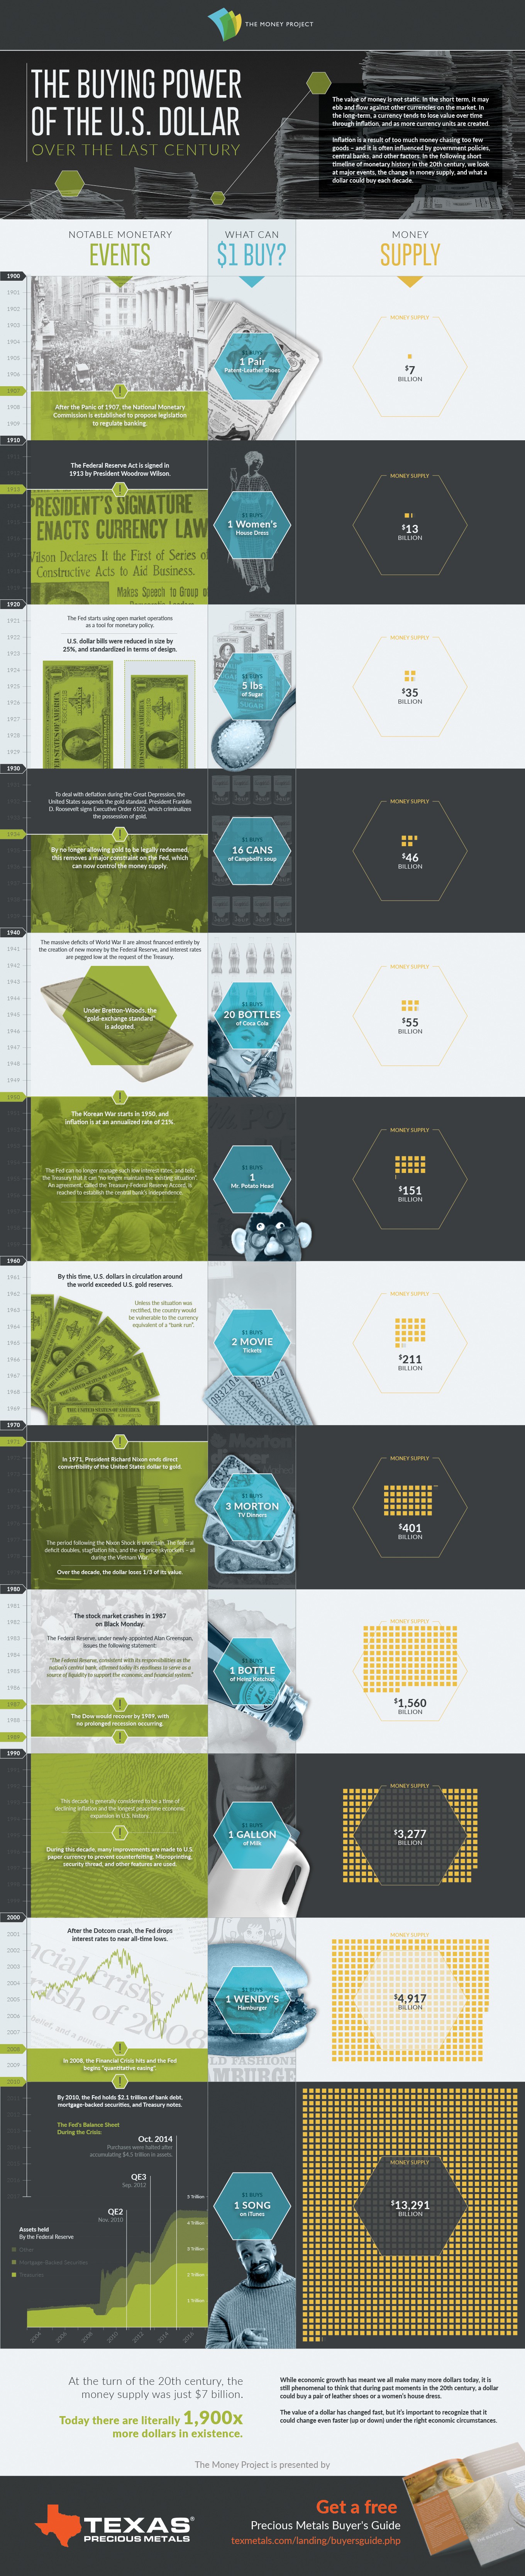 Monetary History of the US Dollar in the 20th Century - Infographic